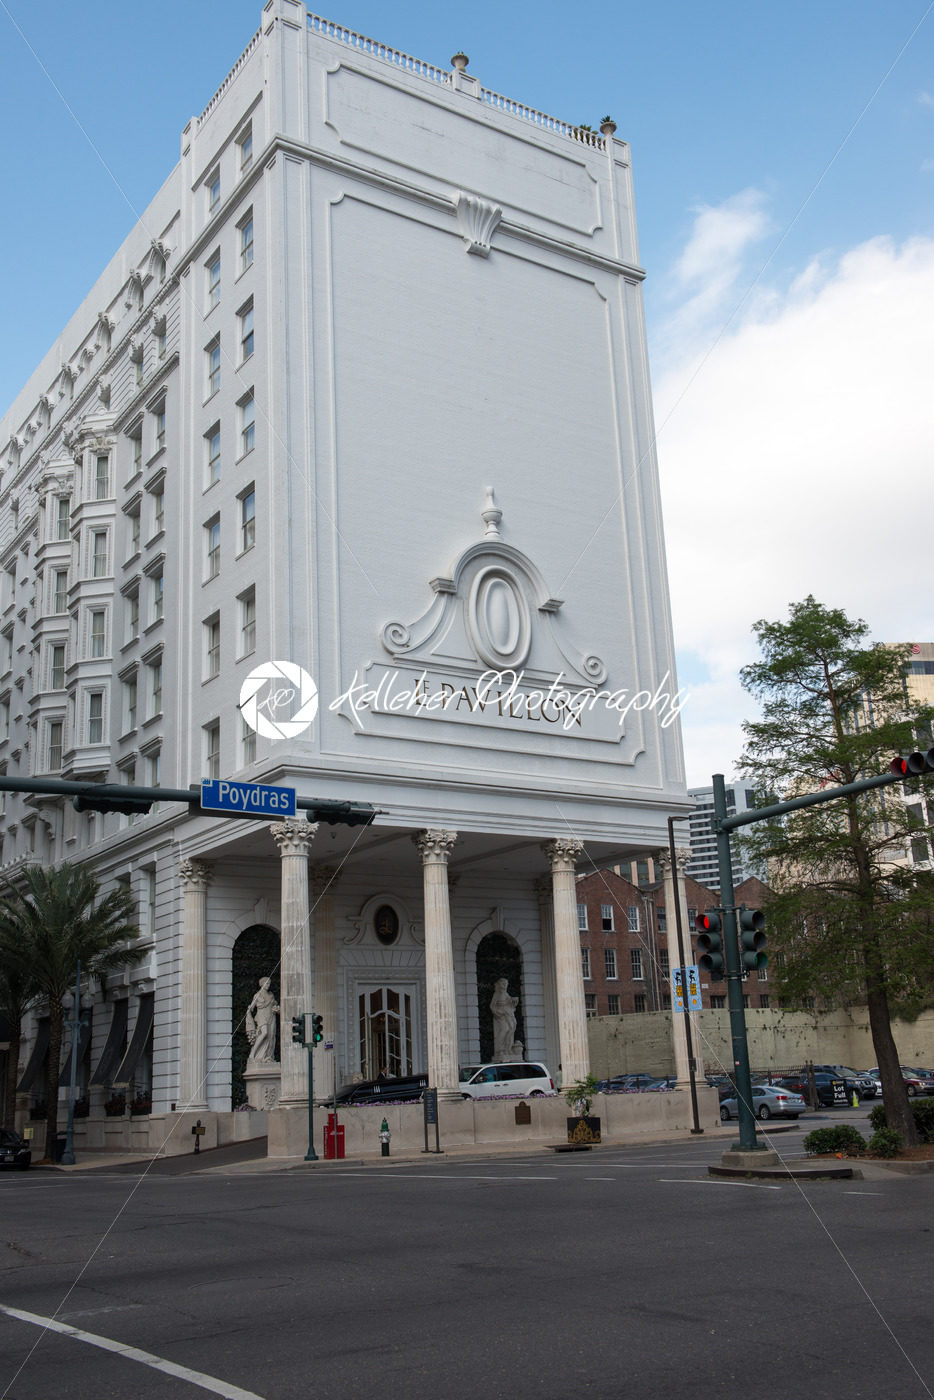 NEW ORLEANS, LA – APRIL 12: Hotel Le Pavillon in Downtown New Orleans, Louisiana, USA on April 12, 2014 - Kelleher Photography Store